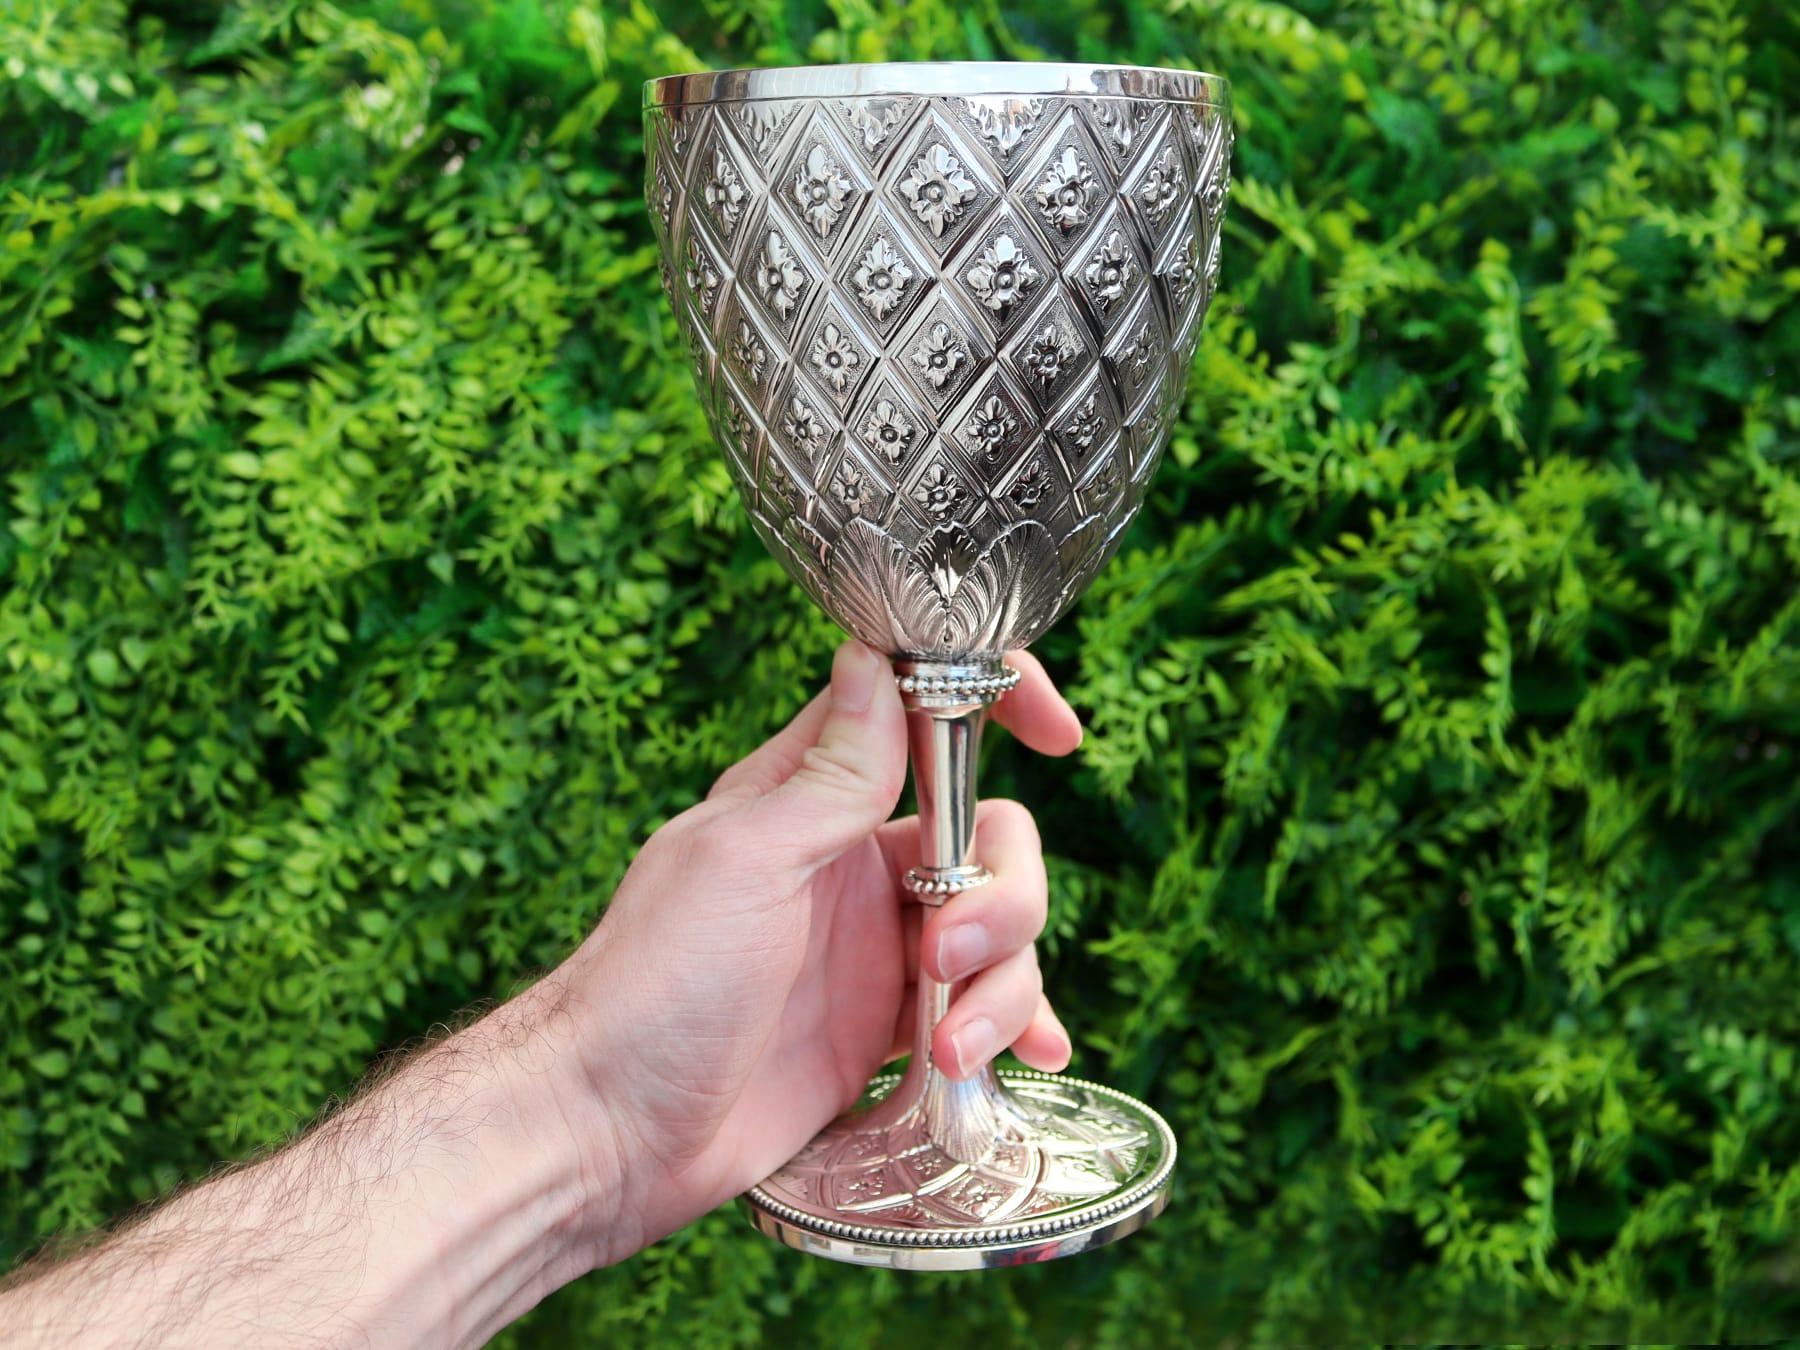 An exceptional, fine and impressive antique Victorian sterling silver goblet; an addition to our wine and drinks related silverware collection

This exceptional antique Victorian sterling silver goblet has a circular bell-shaped form onto a